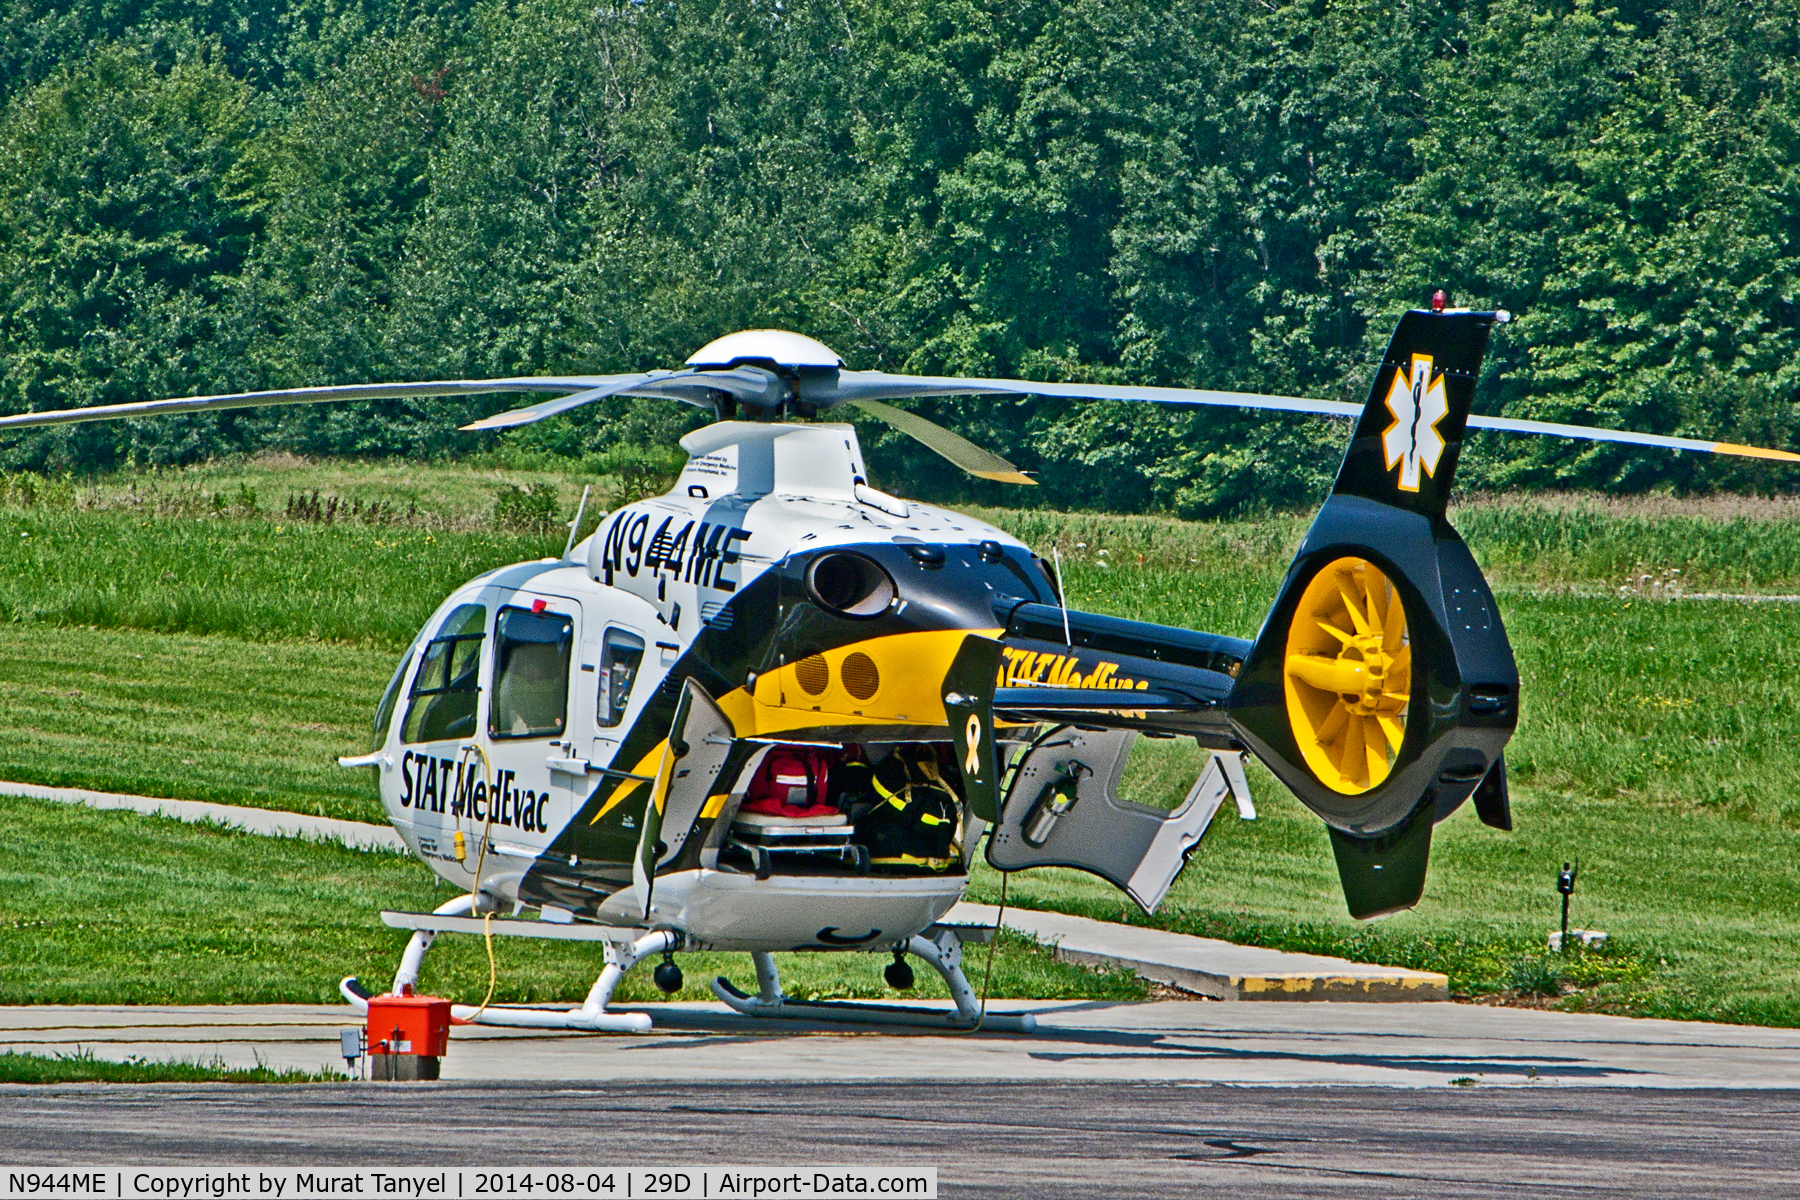 N944ME, 2010 Eurocopter EC-135T-2+ C/N 0945, At Grove City Airport, with its back door open.